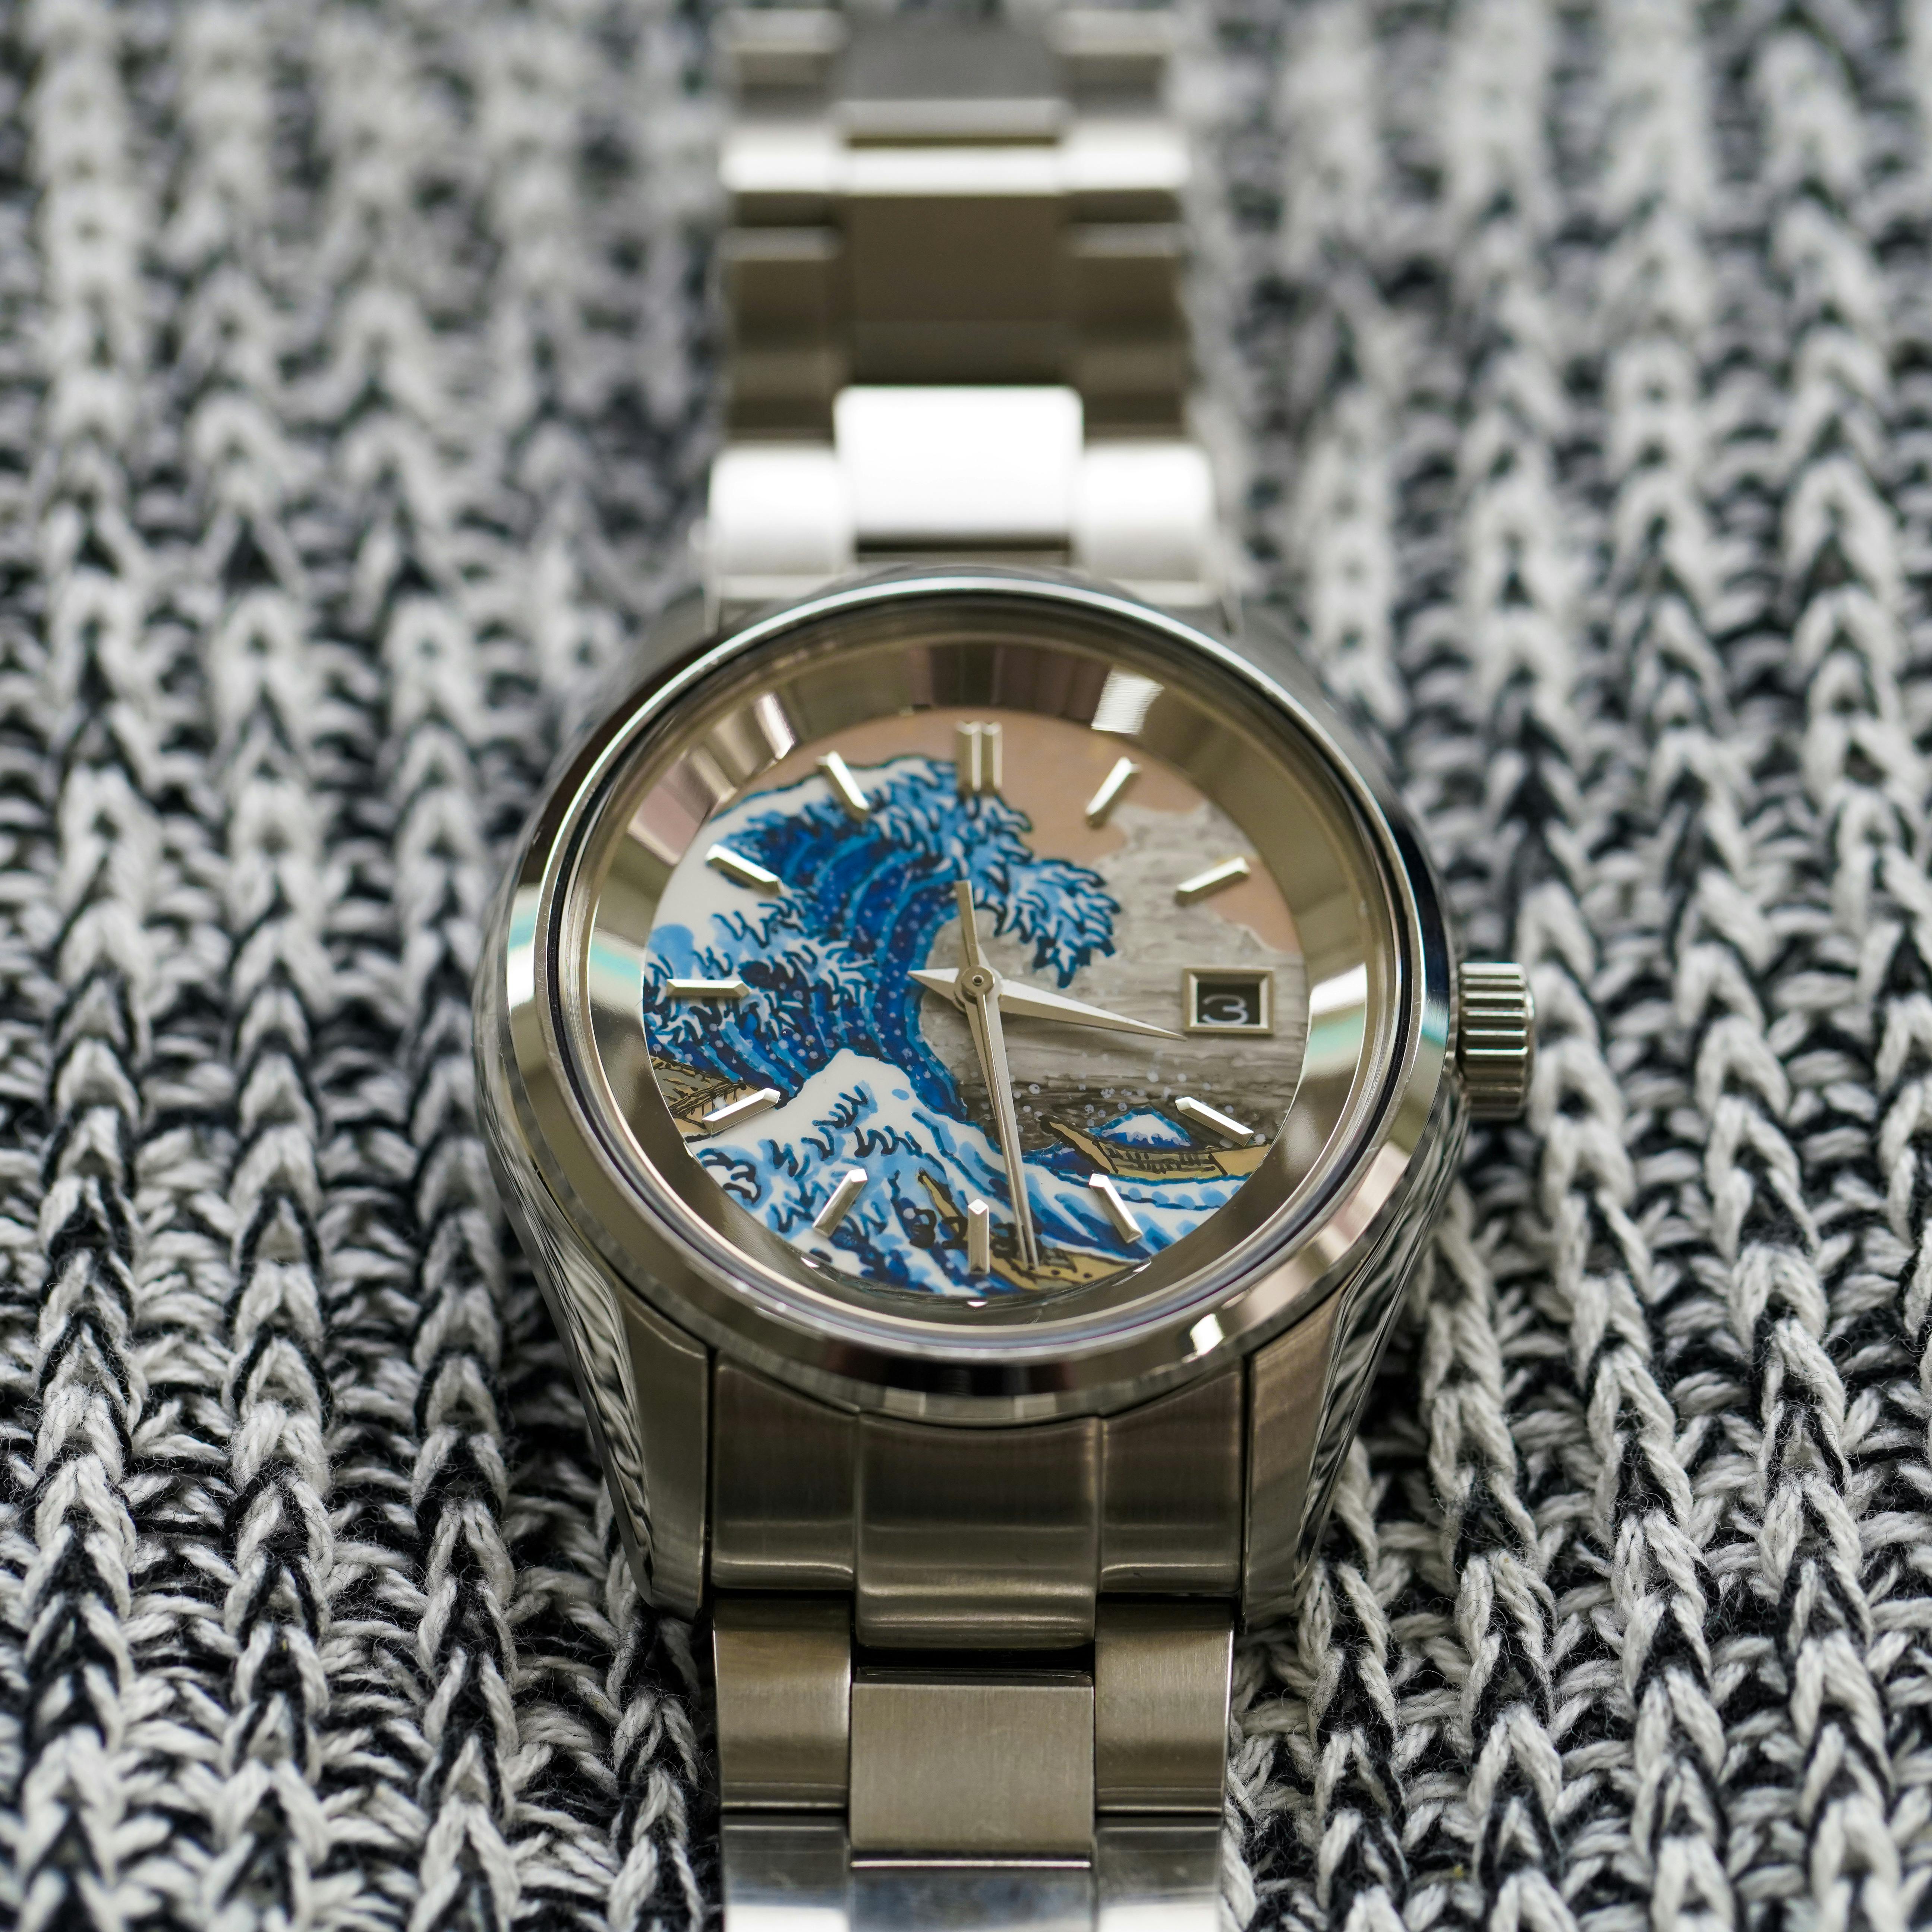 Total 61+ imagen hand painted seiko dial